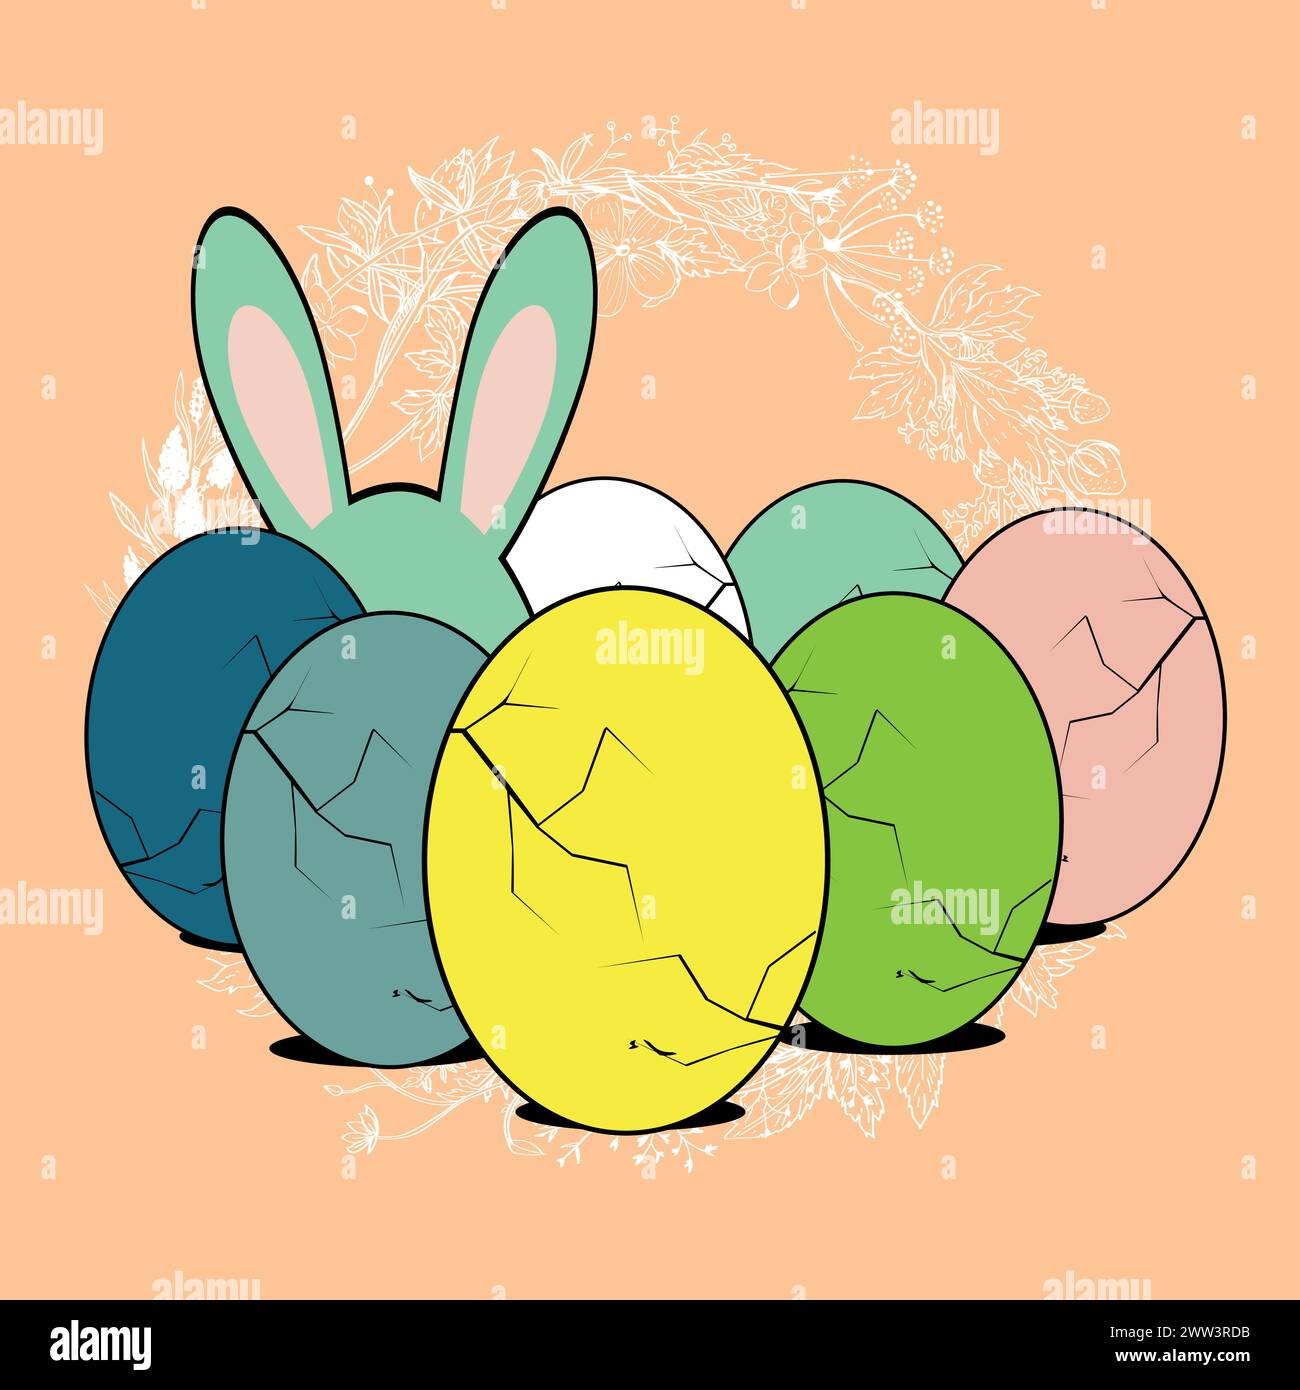 T-shirt design of multicolored Easter eggs and bunny ears on a pink background. Stock Vector